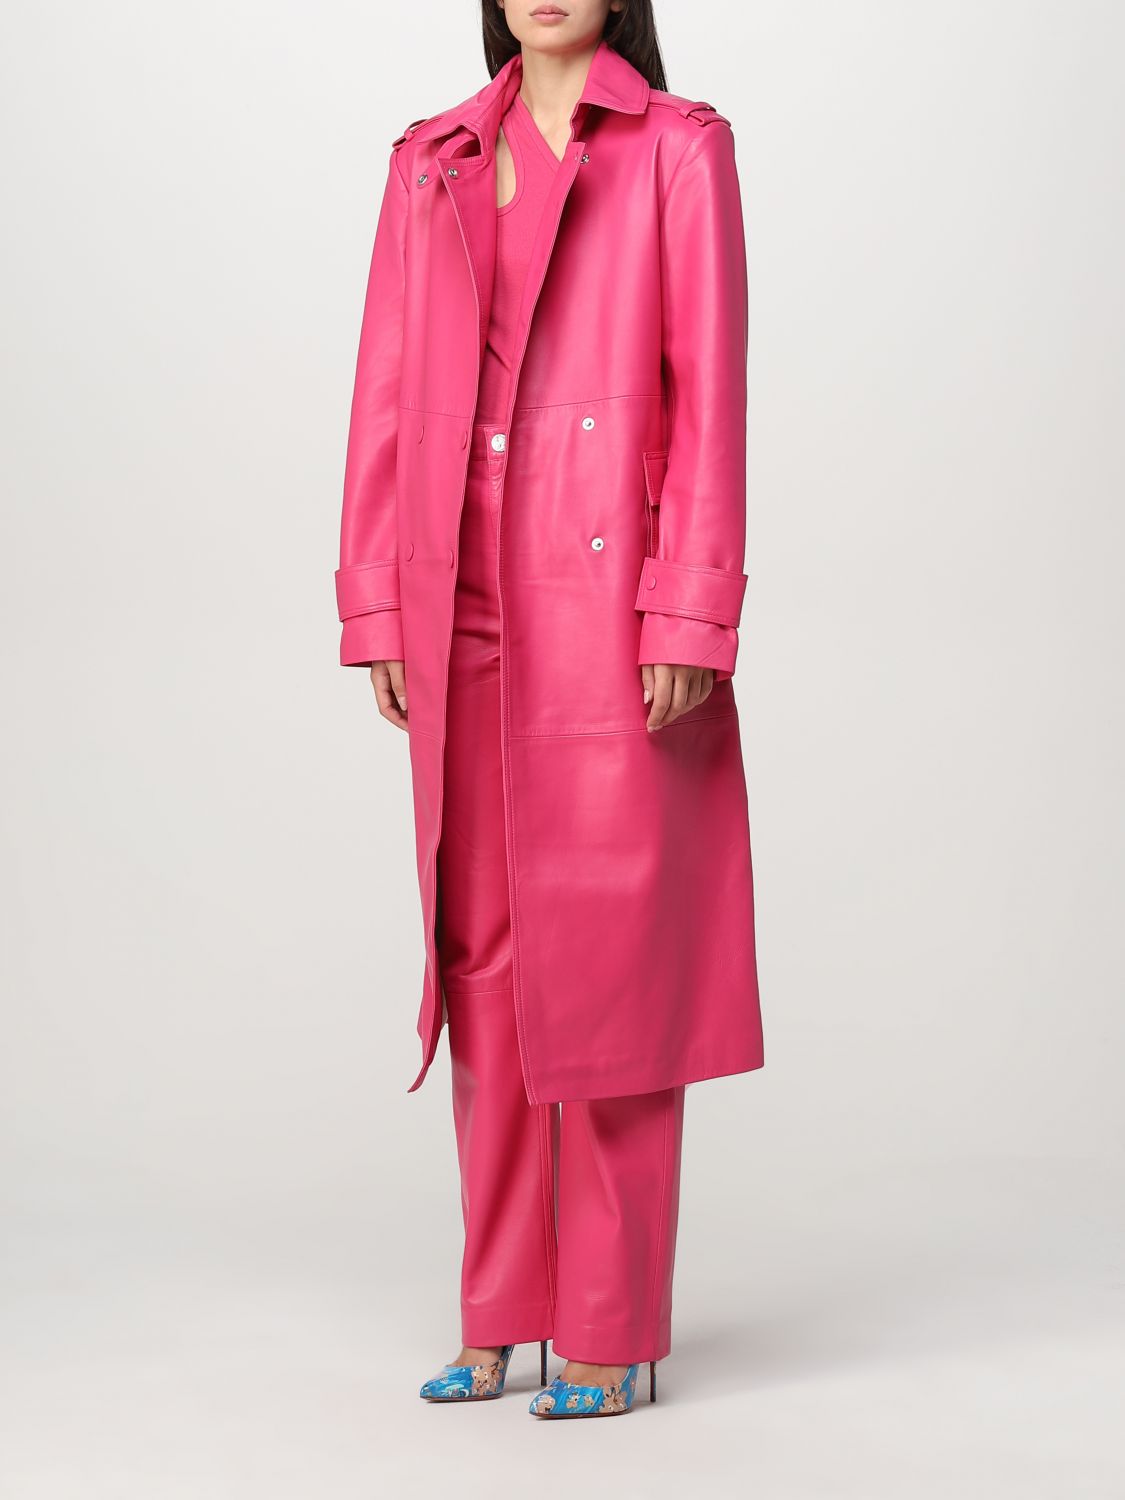 Jacket Remain: Remain jacket for women pink 4